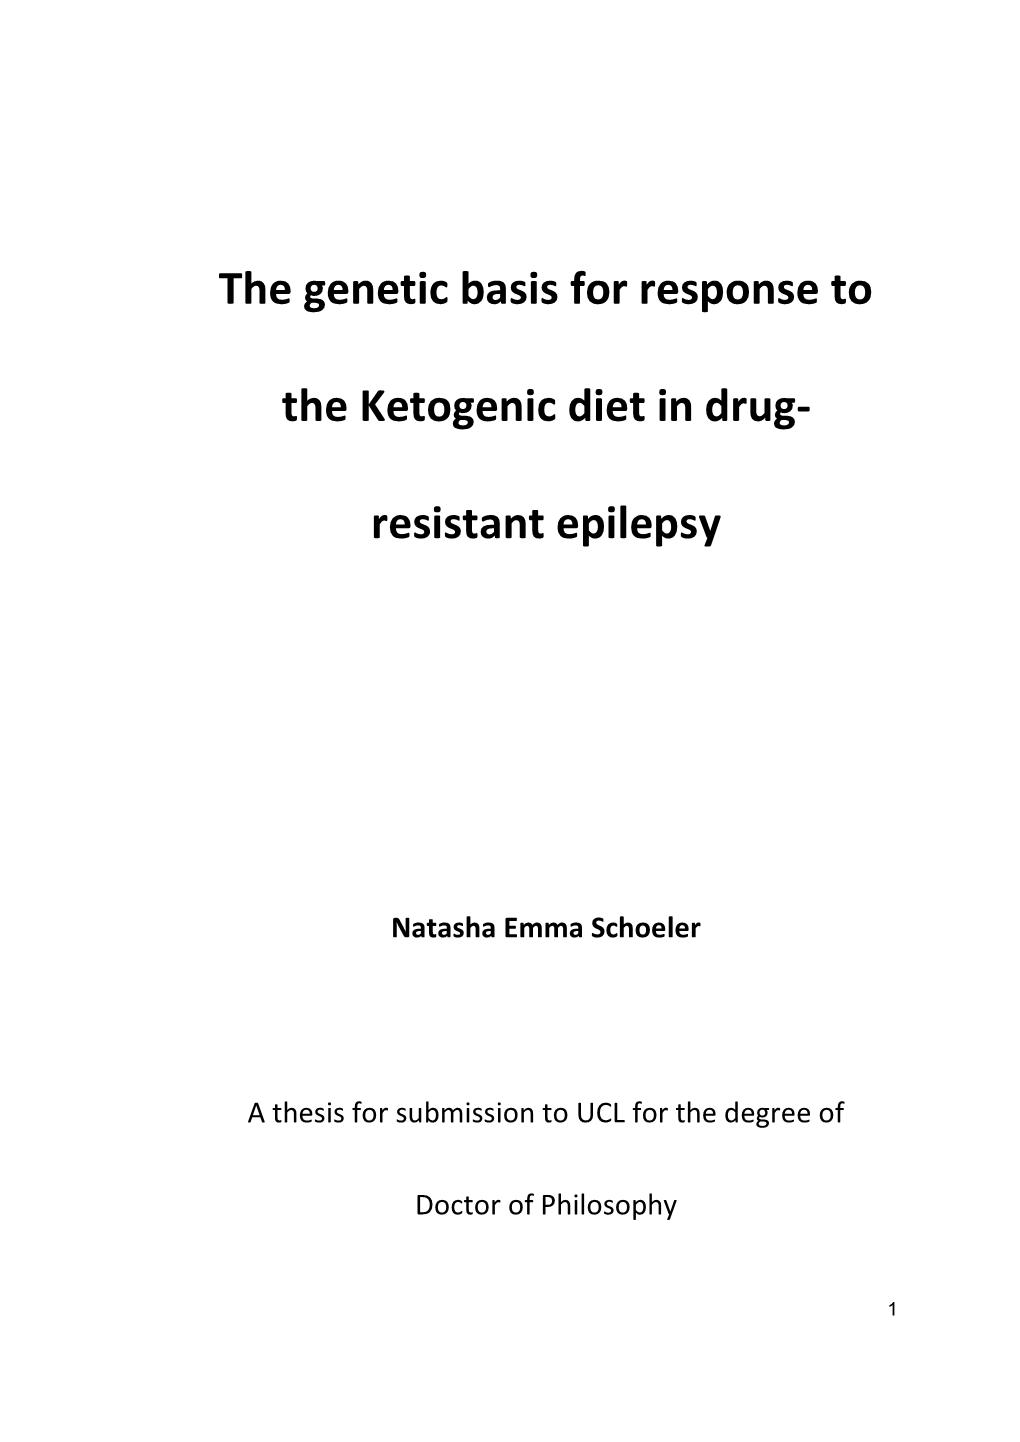 The Genetic Basis for Response to the Ketogenic Diet in Drug